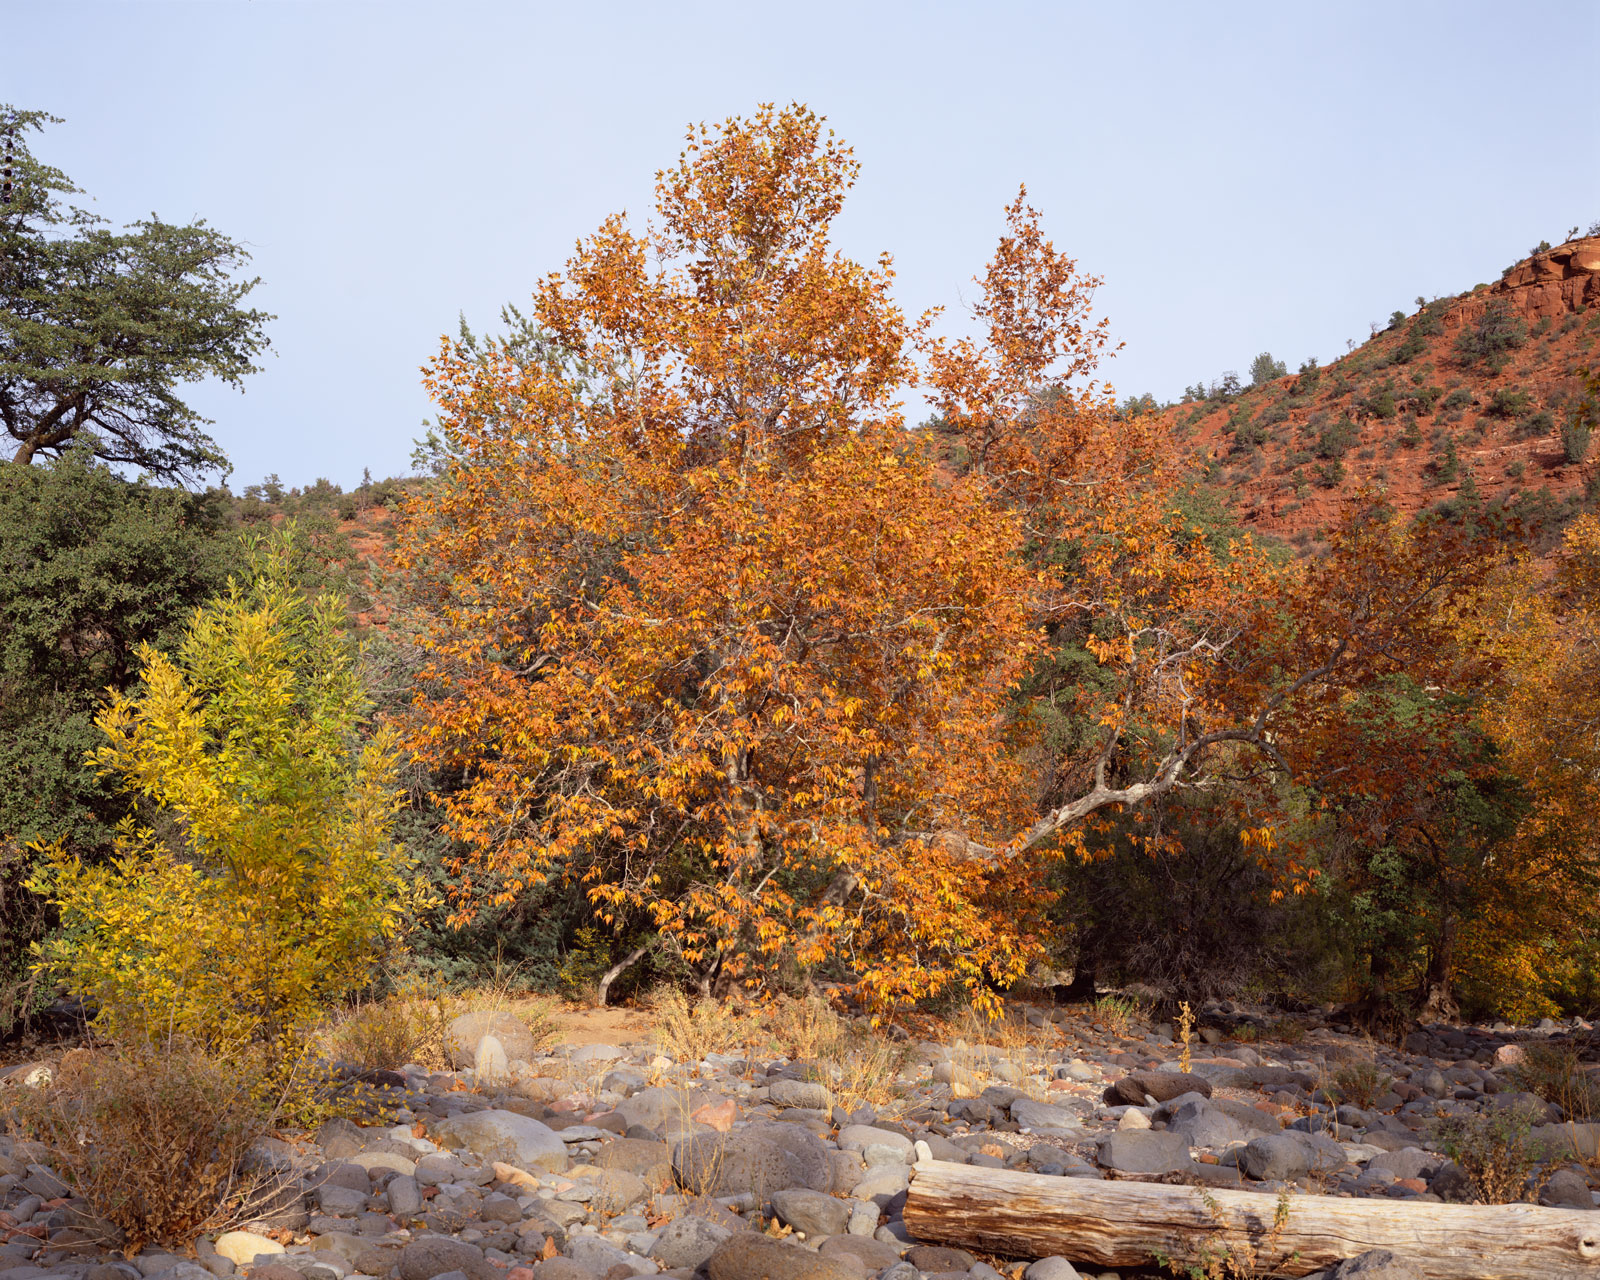 Fall leaves on the Sycamores, with the yellow bush and a log in front, at Grasshopper Point north of Sedona